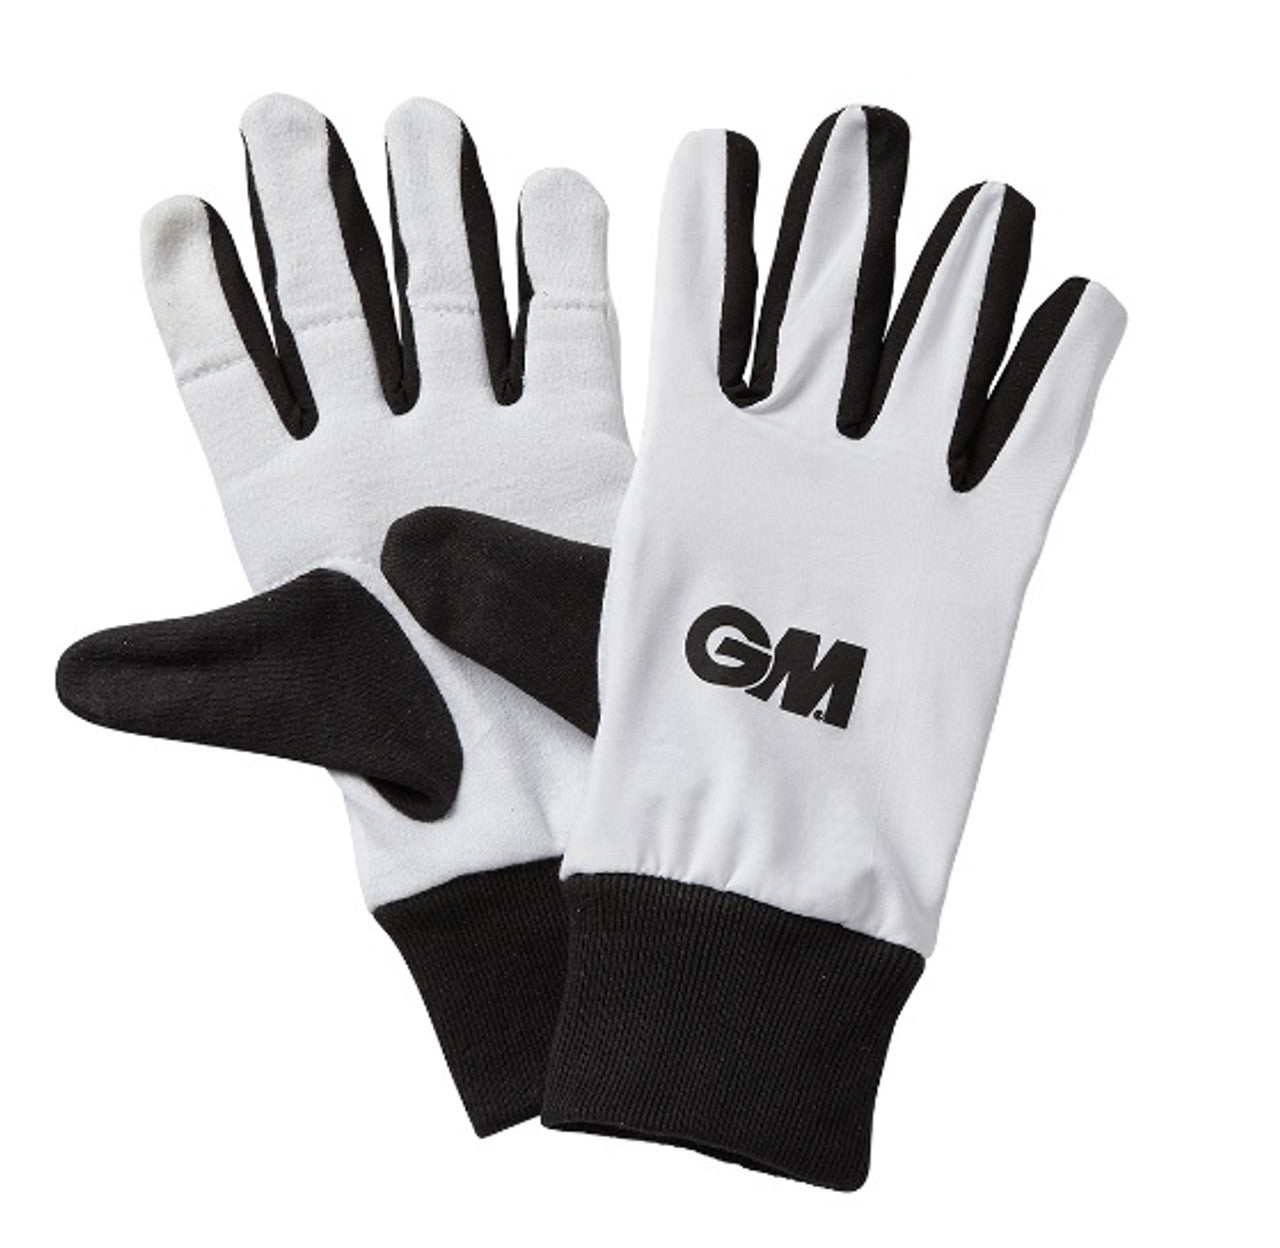 GM Wicket Keeping Gloves INNER PADDED COTTON